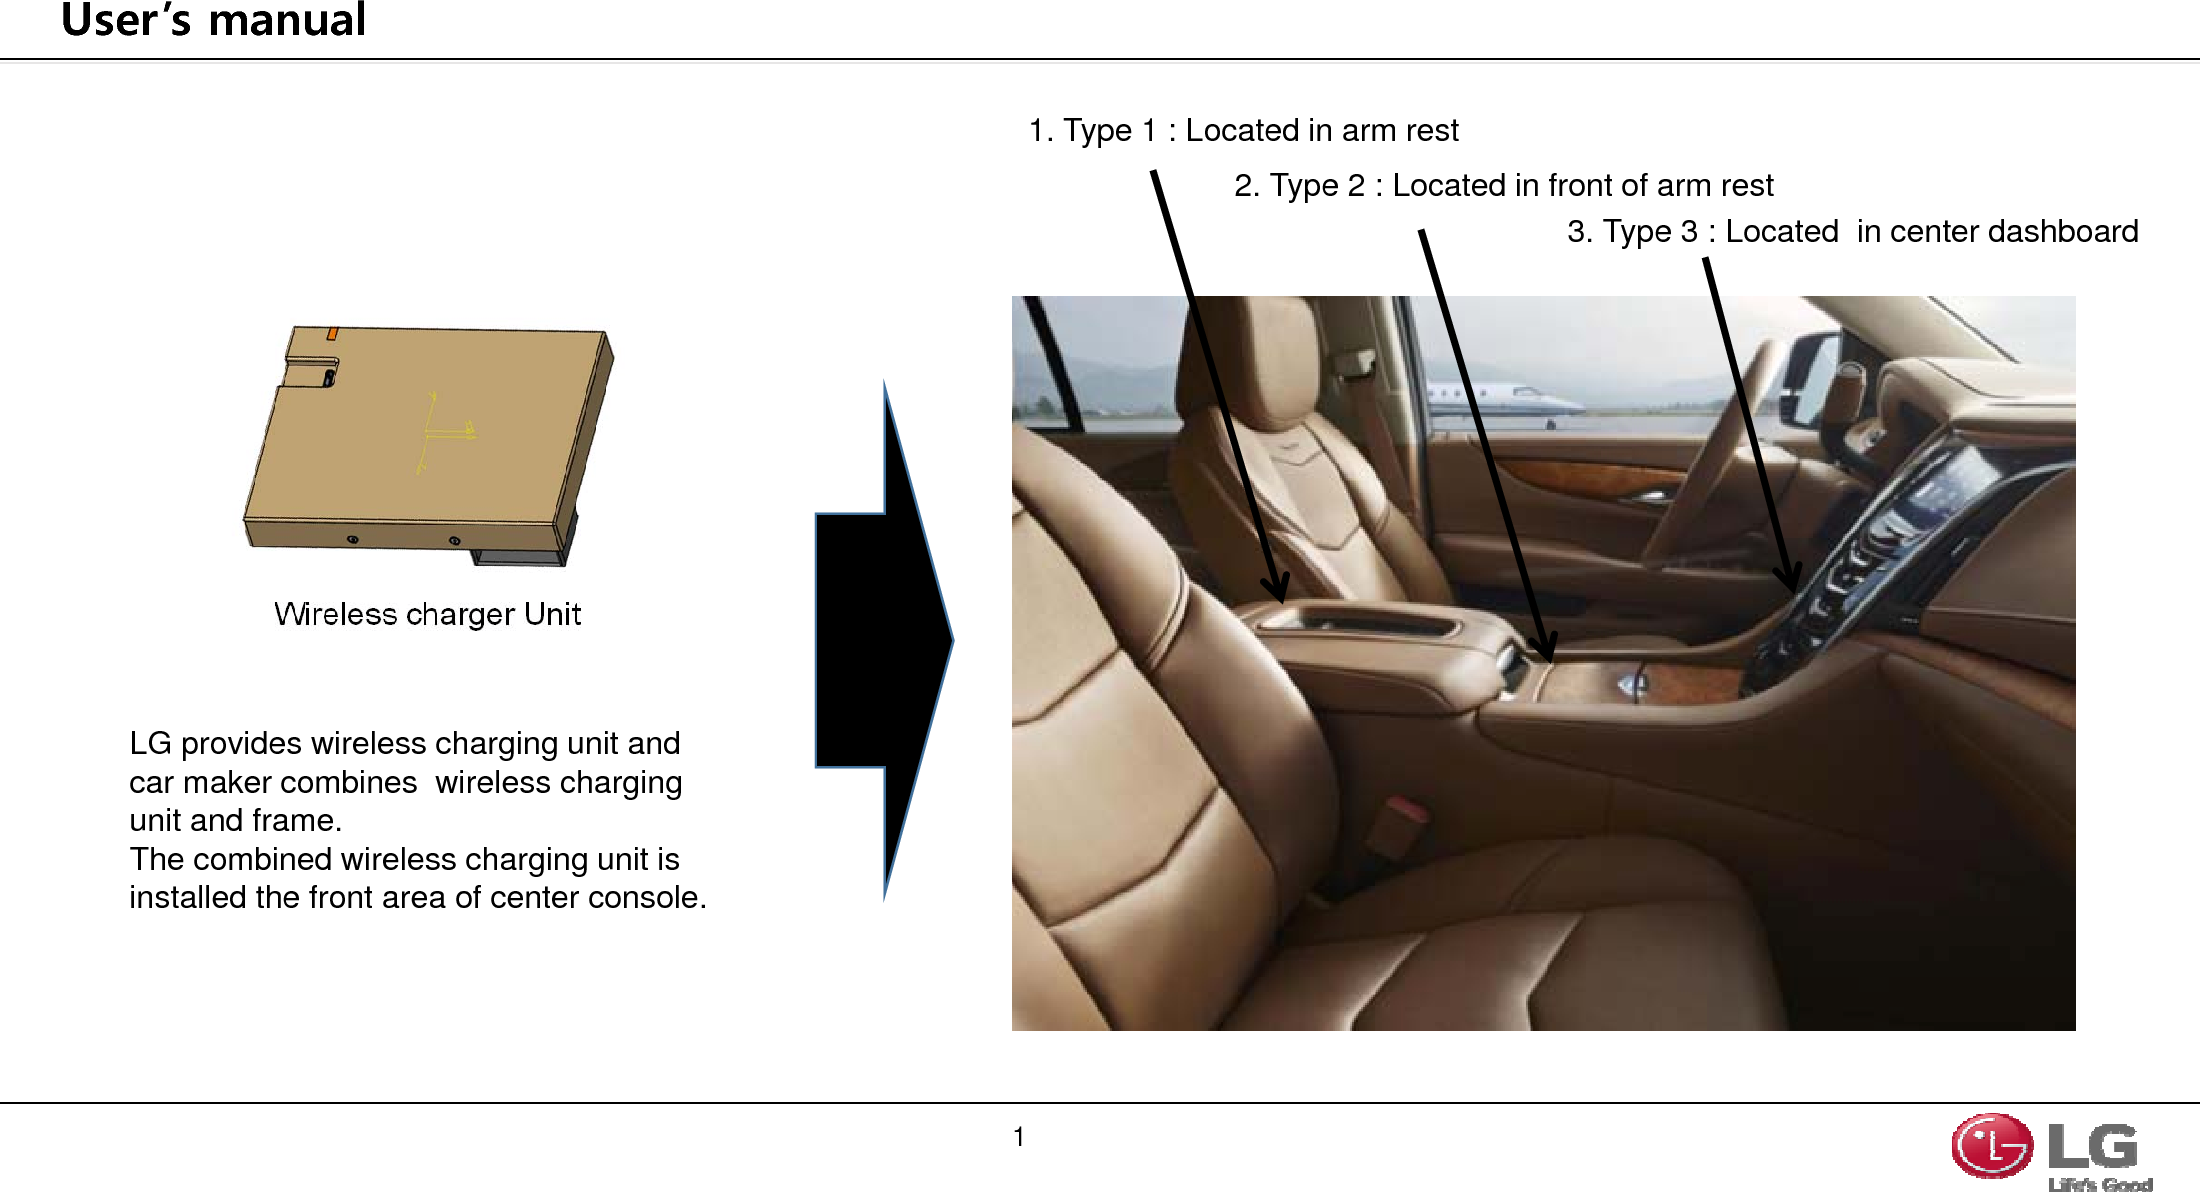 User’s manualWireless charger UnitLG provides wireless charging unit and car maker combines  wireless charging unit and frame.The combined wireless charging unit is installed the front area of center console.2. Type 2 : Located in front of arm rest3. Type 3 : Located  in center dashboard1. Type 1 : Located in arm rest1